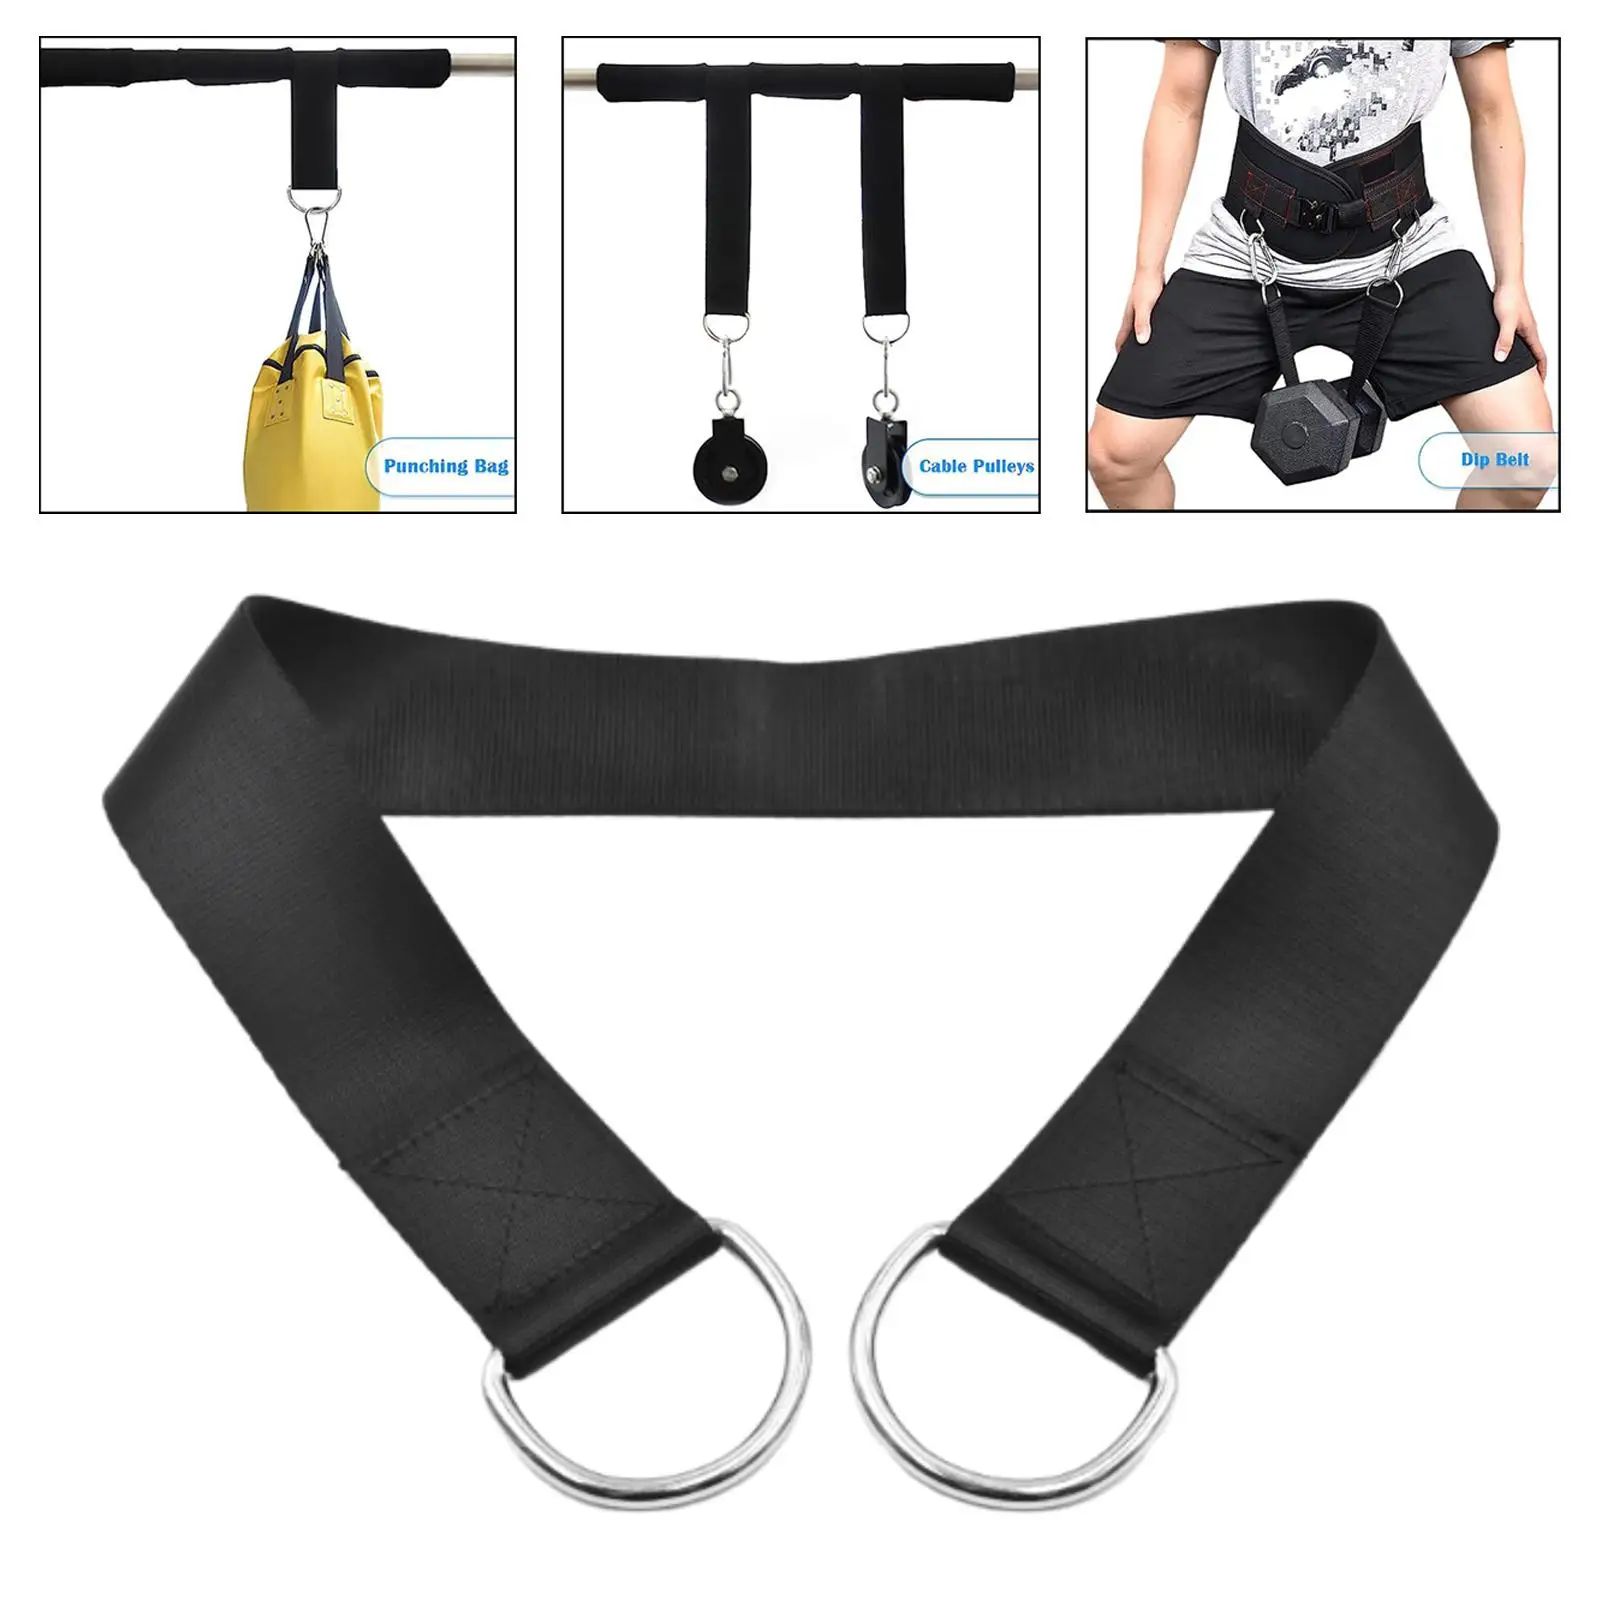 Fitness Rope Multifunctional Arms Workout Equipment Dumbbell Loading Strap